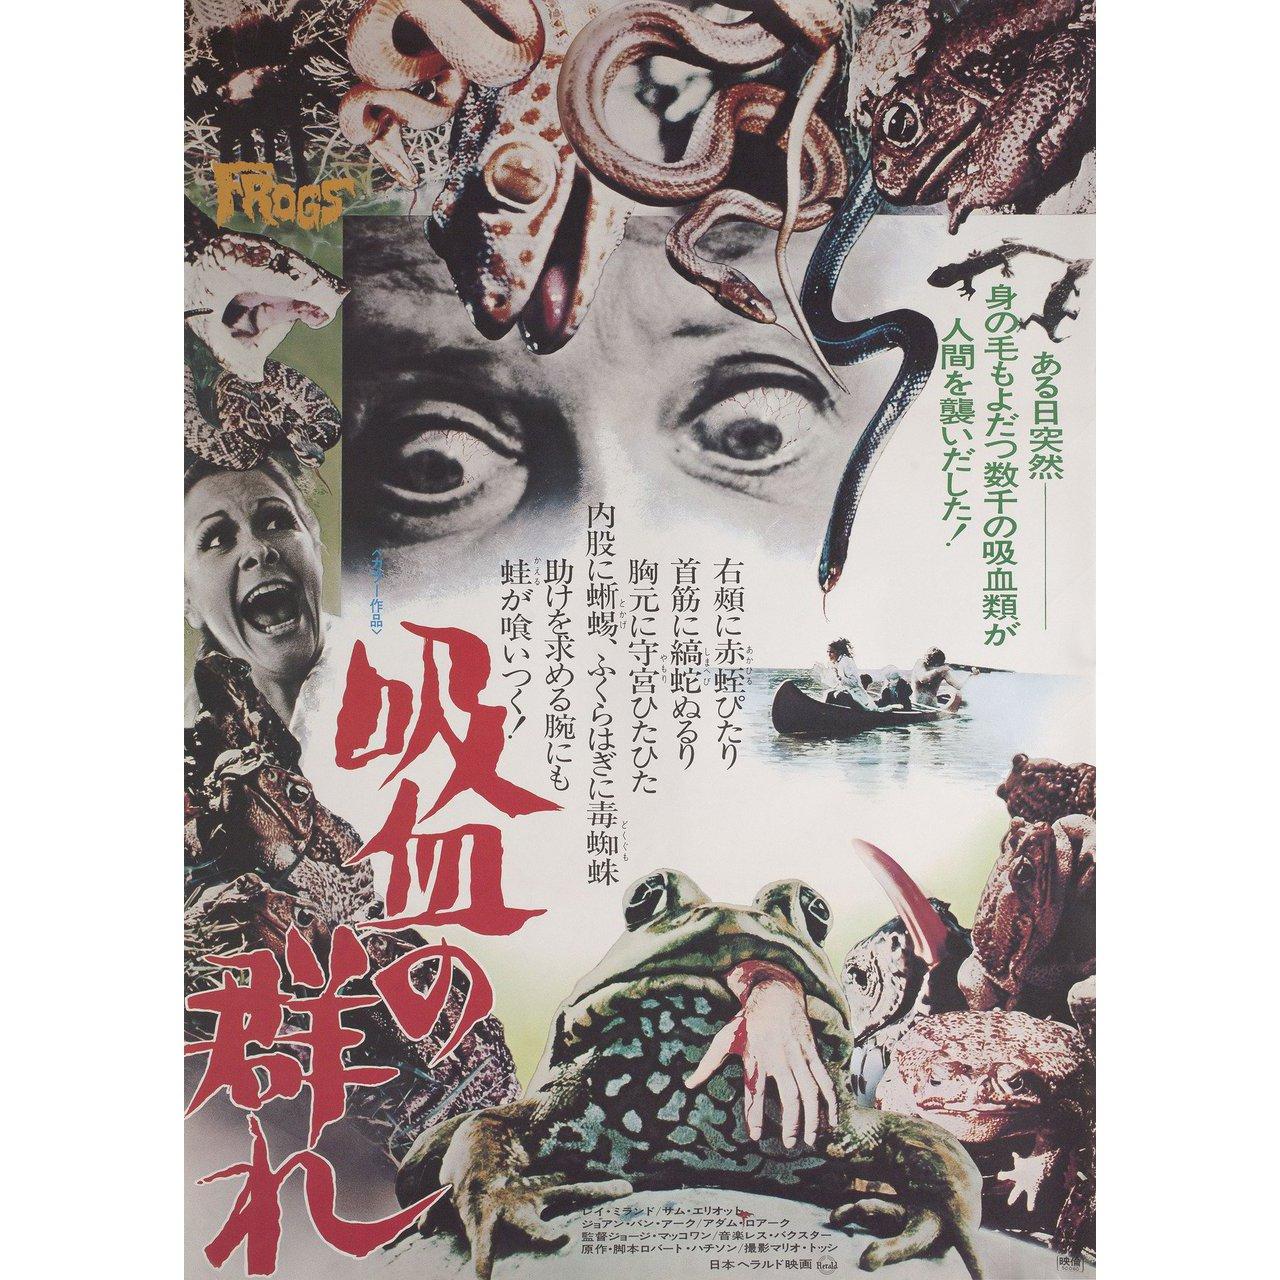 Original 1975 Japanese B2 poster for the 1972 film Frogs directed by George McCowan with Ray Milland / Sam Elliott / Joan Van Ark / Adam Roarke. Fine condition, folded. Many original posters were issued folded or were subsequently folded. Please